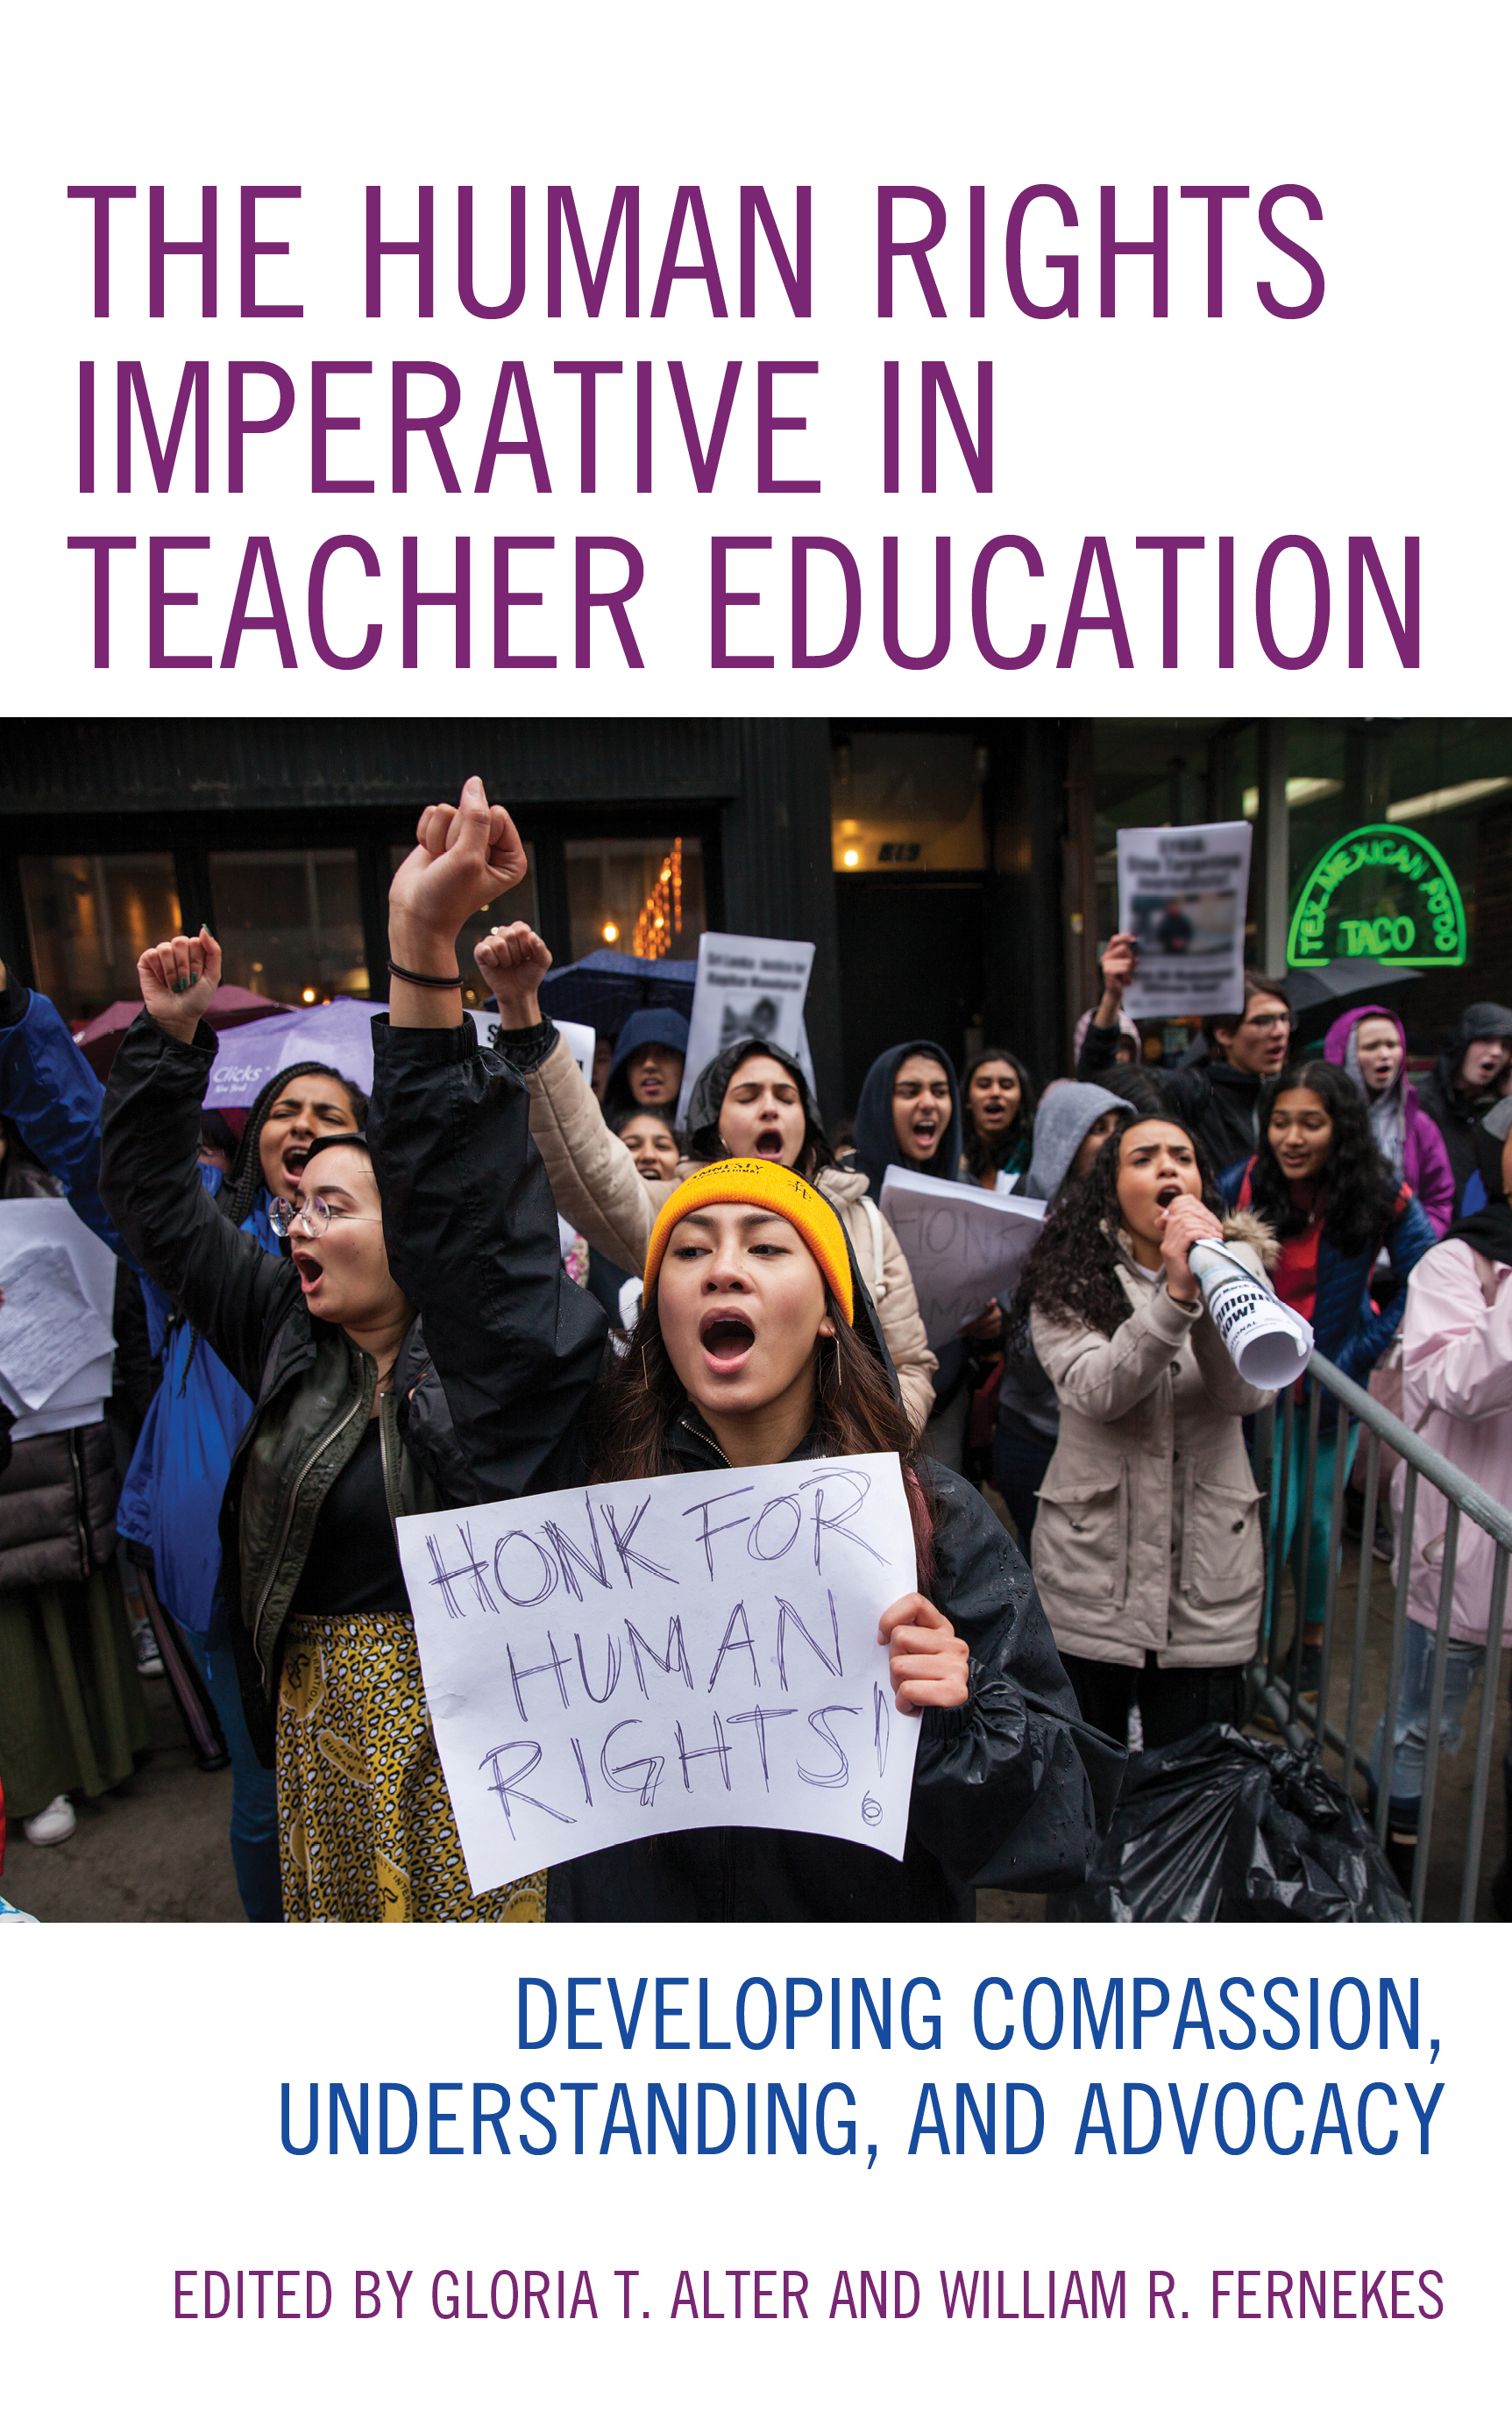 The Human Rights Imperative in Teacher Education: Developing Compassion, Understanding, and Advocacy